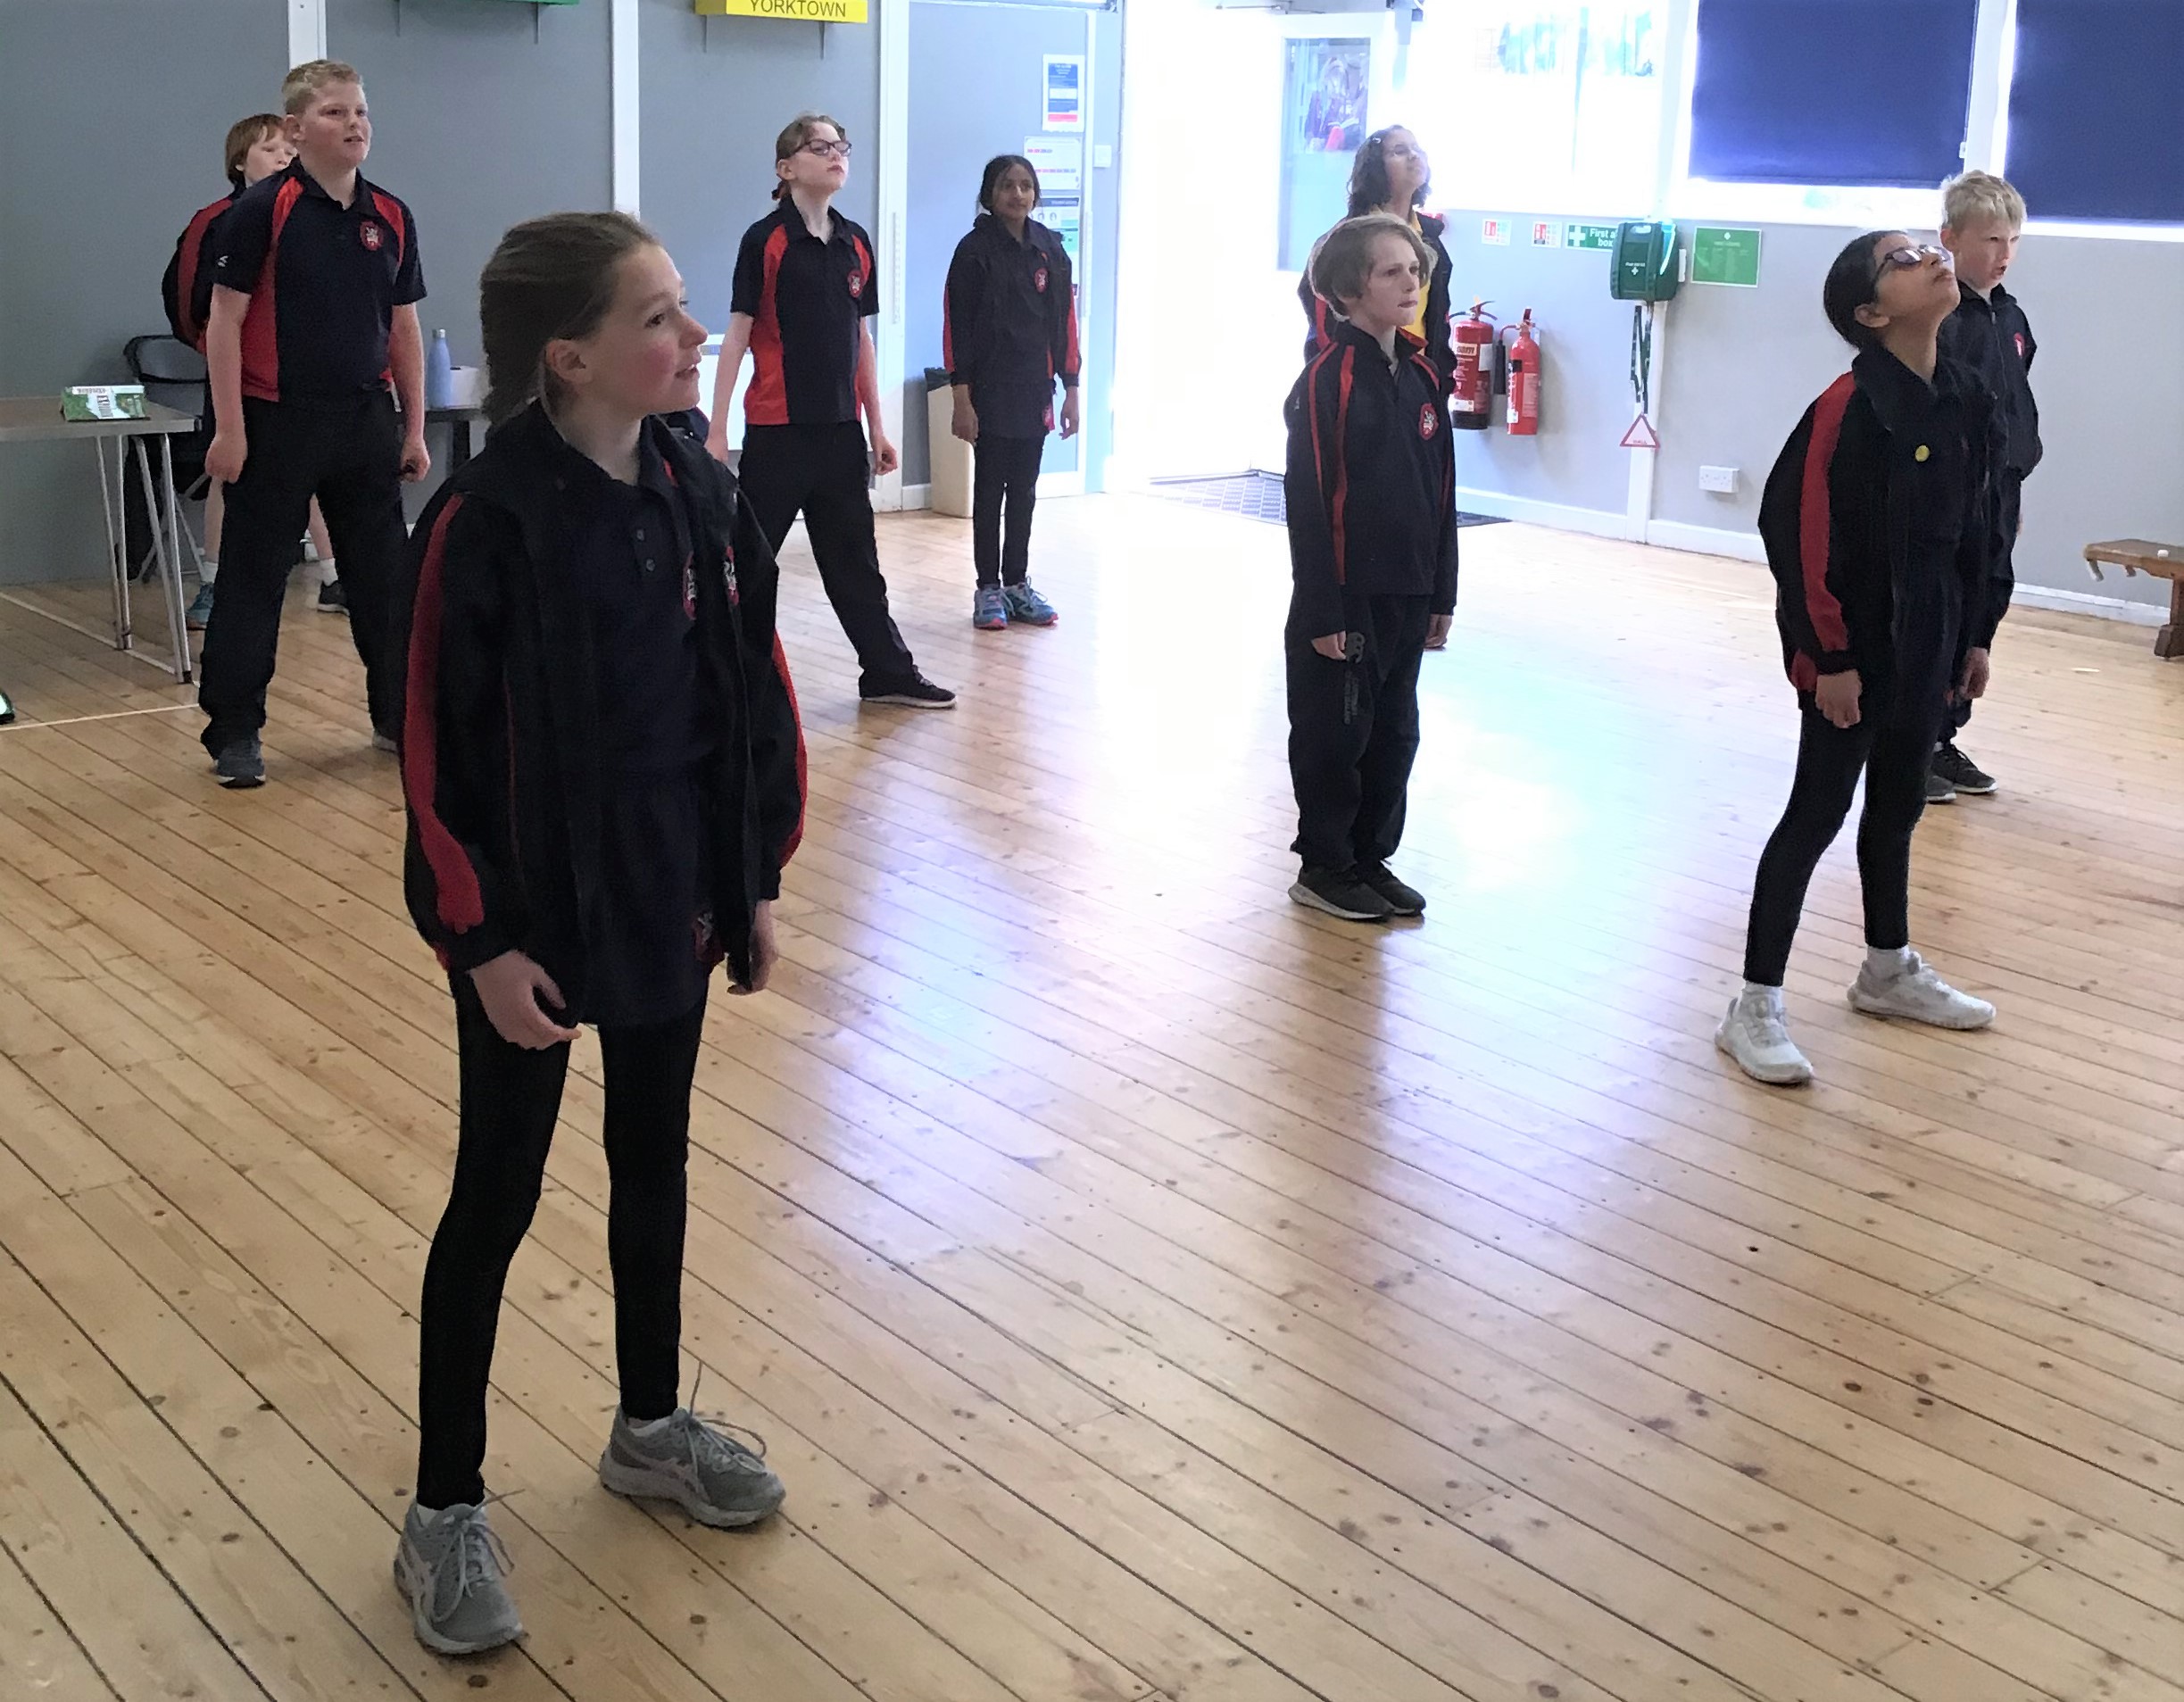 Year 5 Concentrating in the Dance Workshop